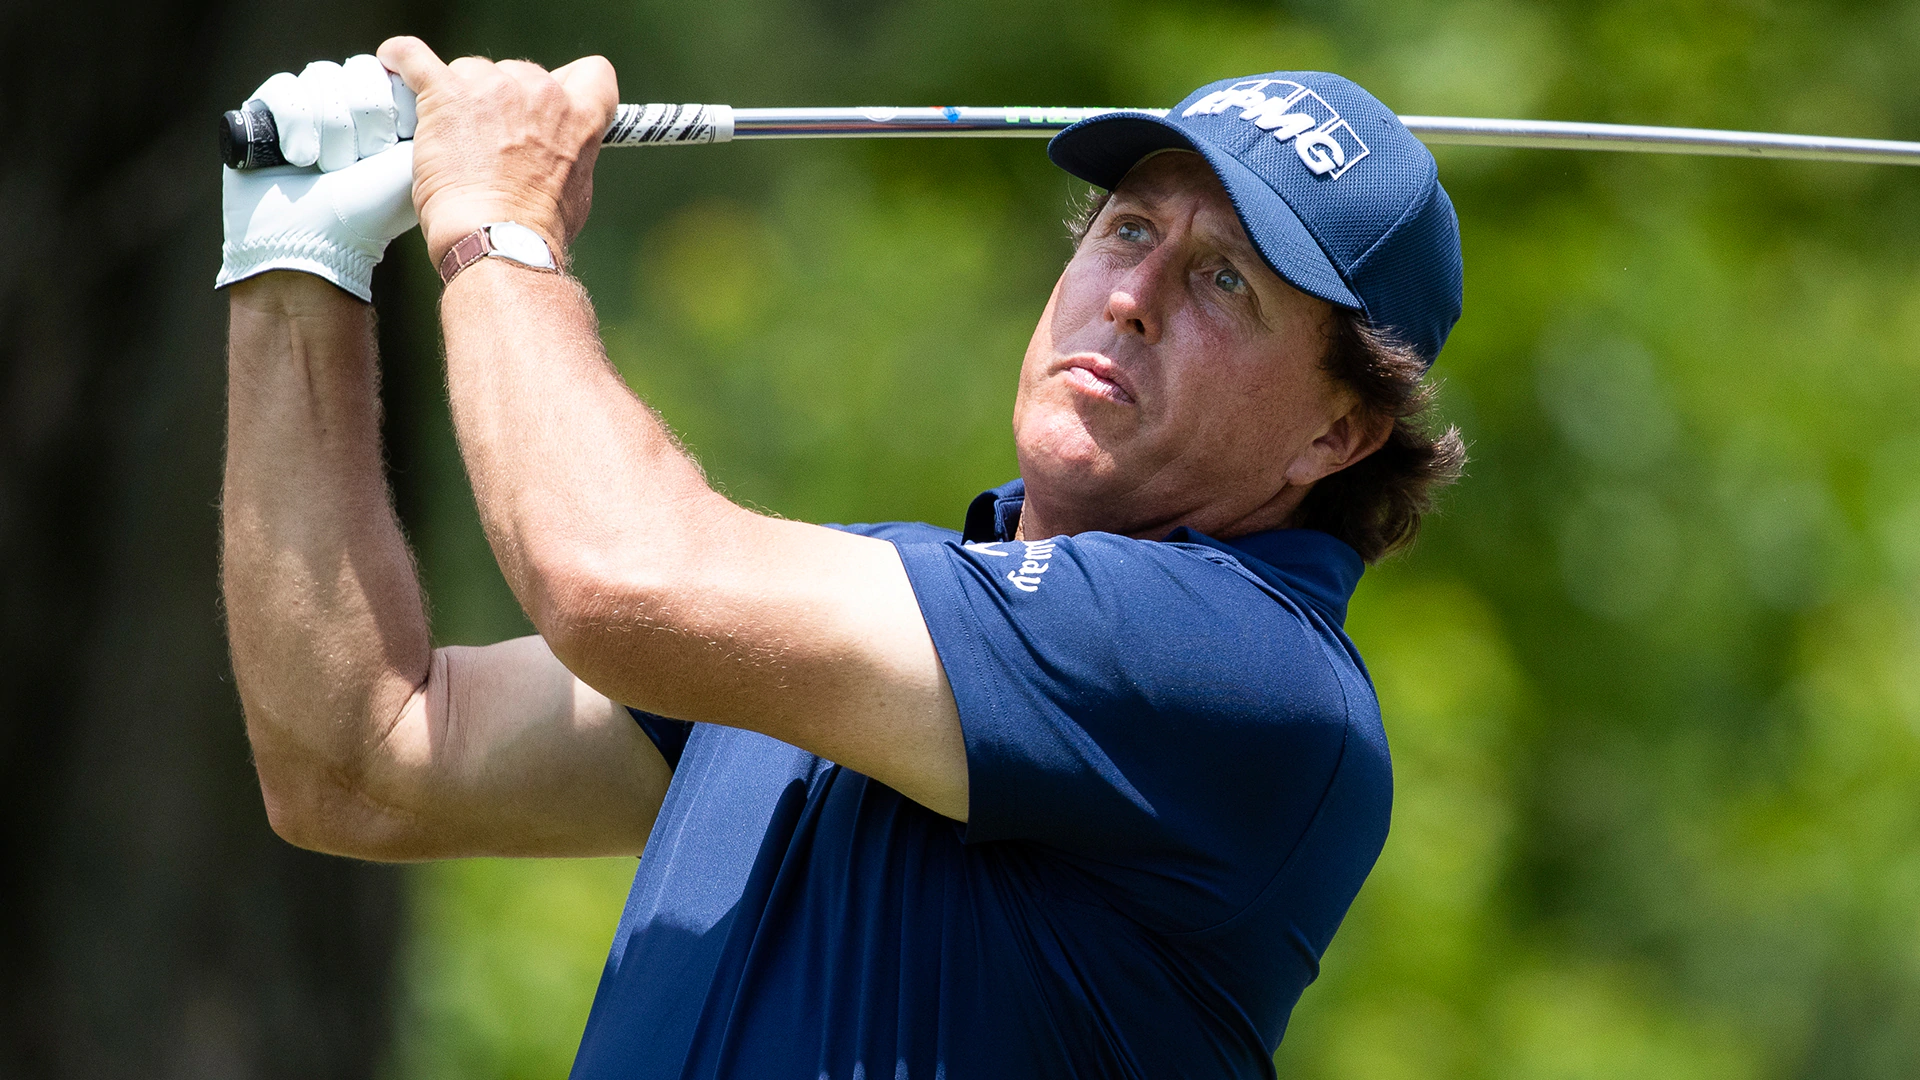 Mickelson mum on reported $10 million Tiger match